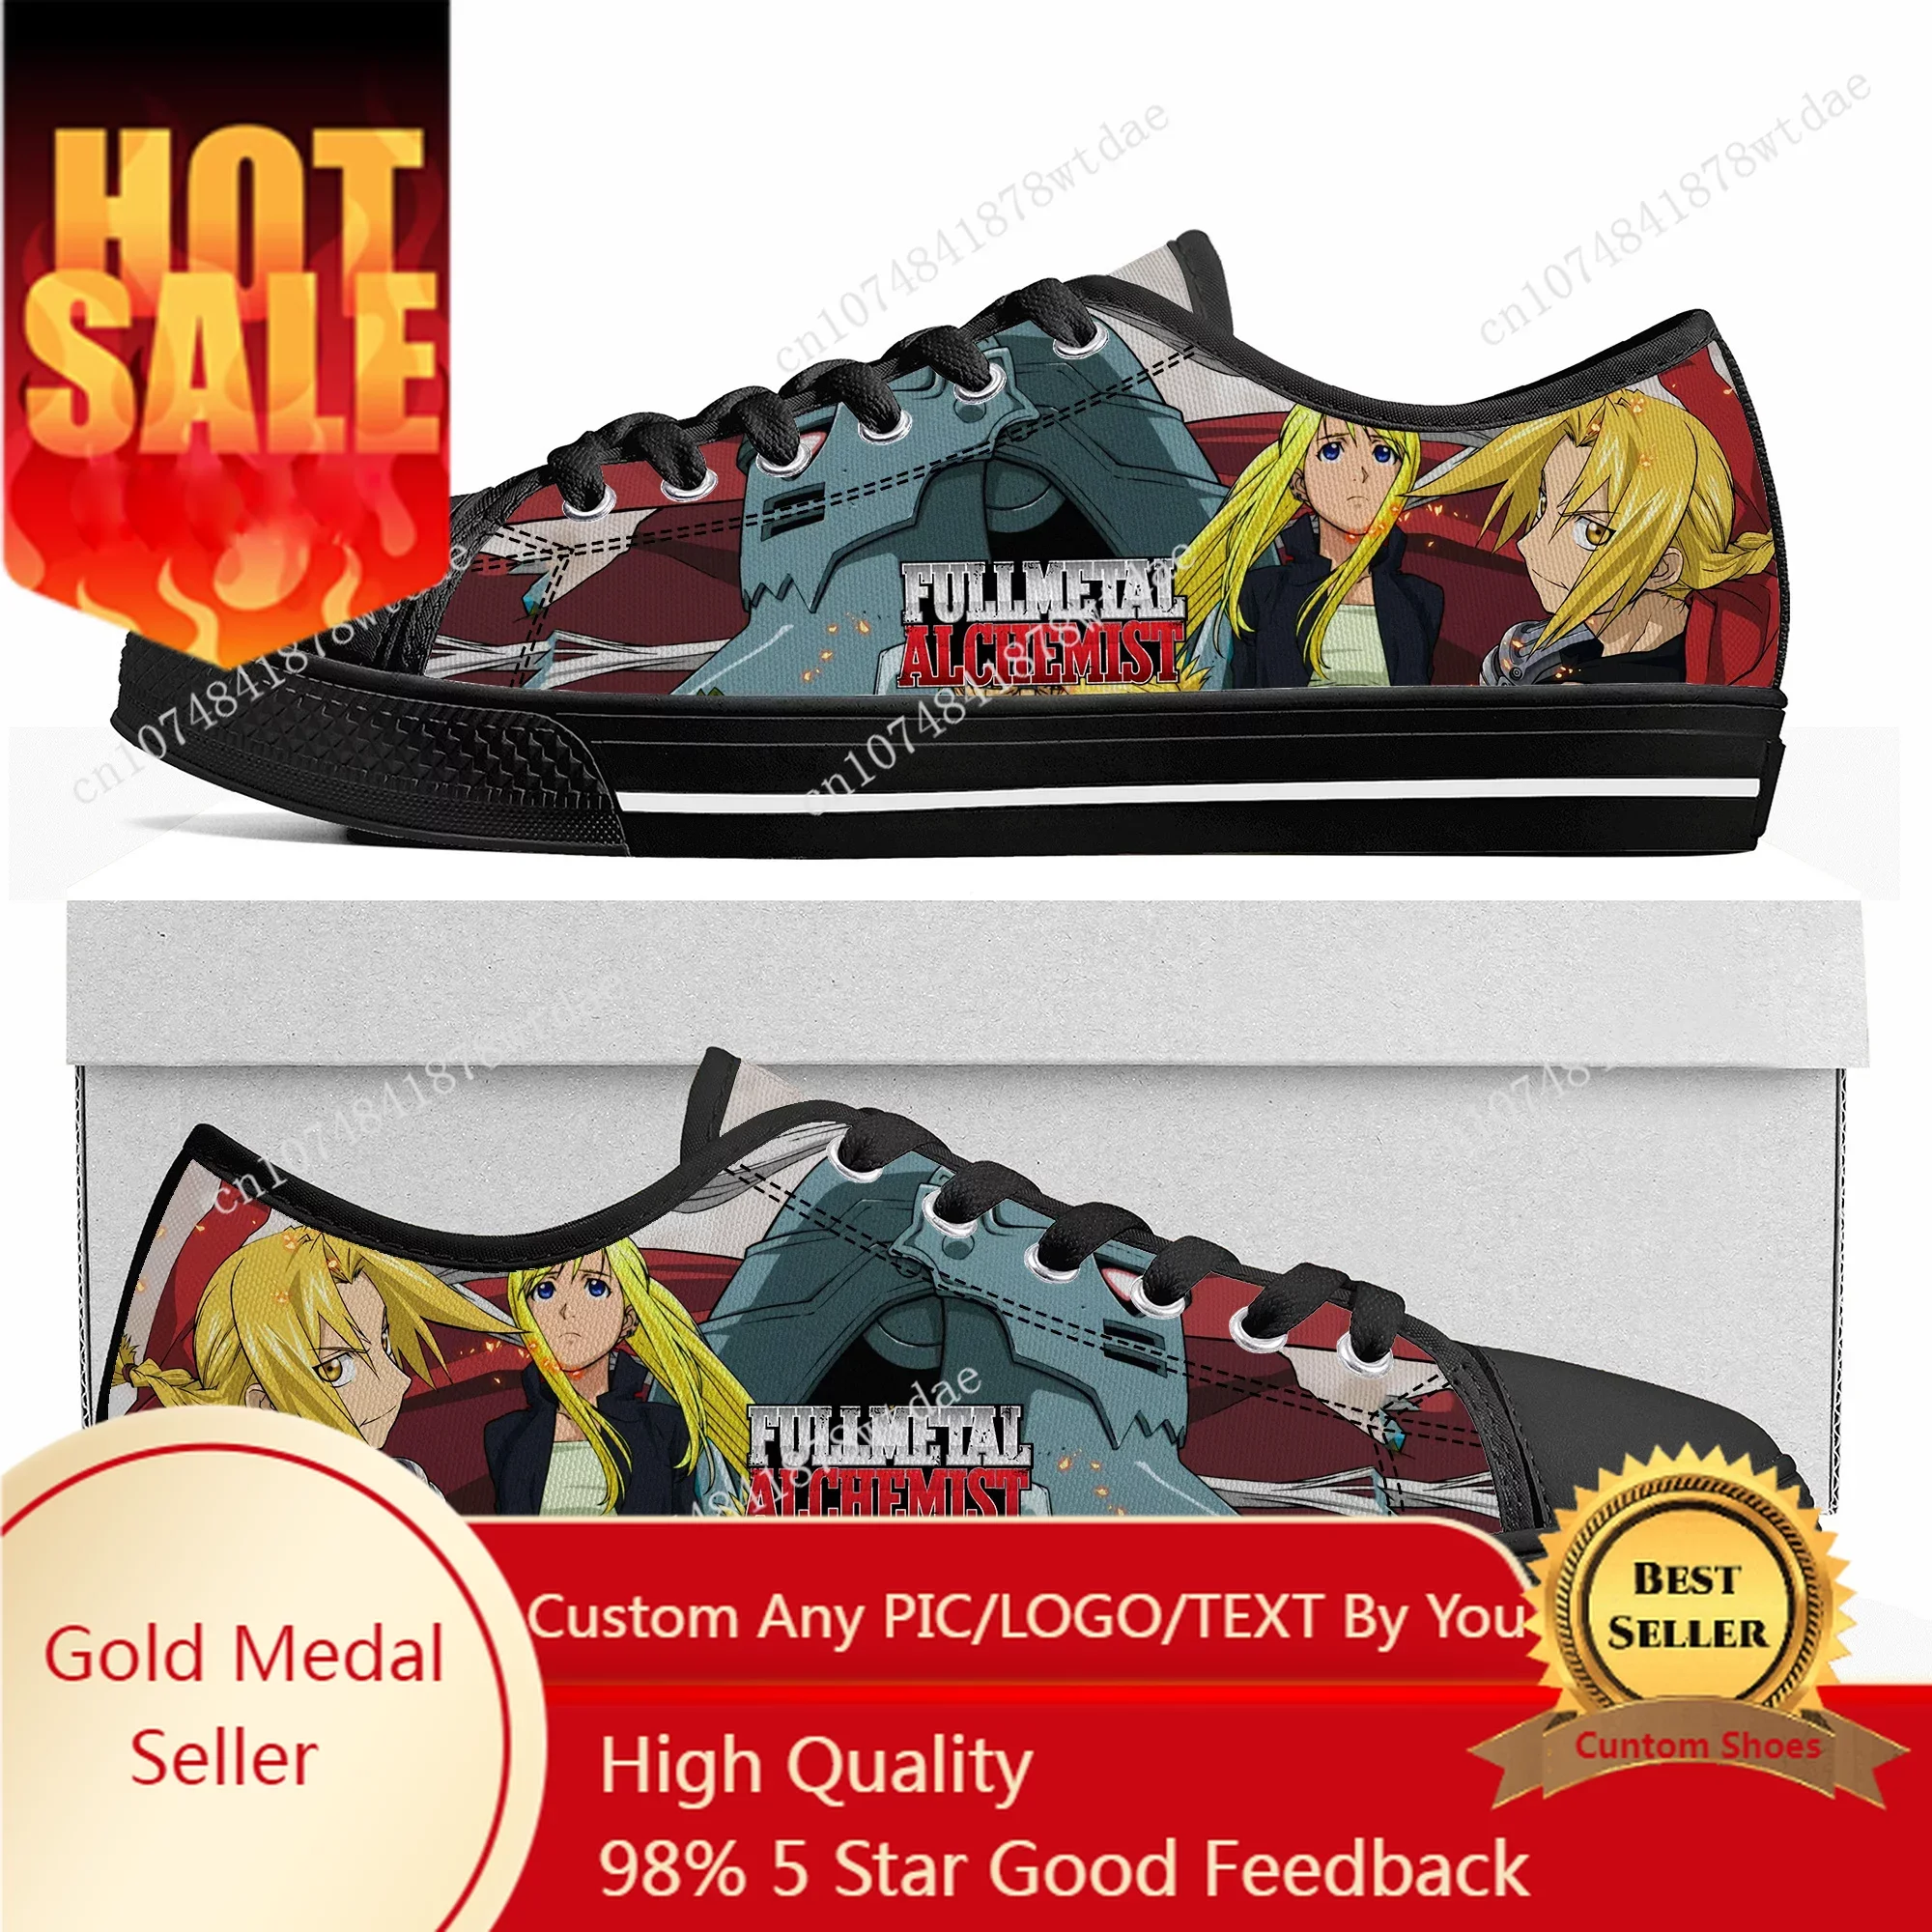 

Fullmetal Alchemist Low Top Sneakers Women Mens Teenager High Quality Edward Elric Canvas Sneaker Casual Cartoon Customize Shoes